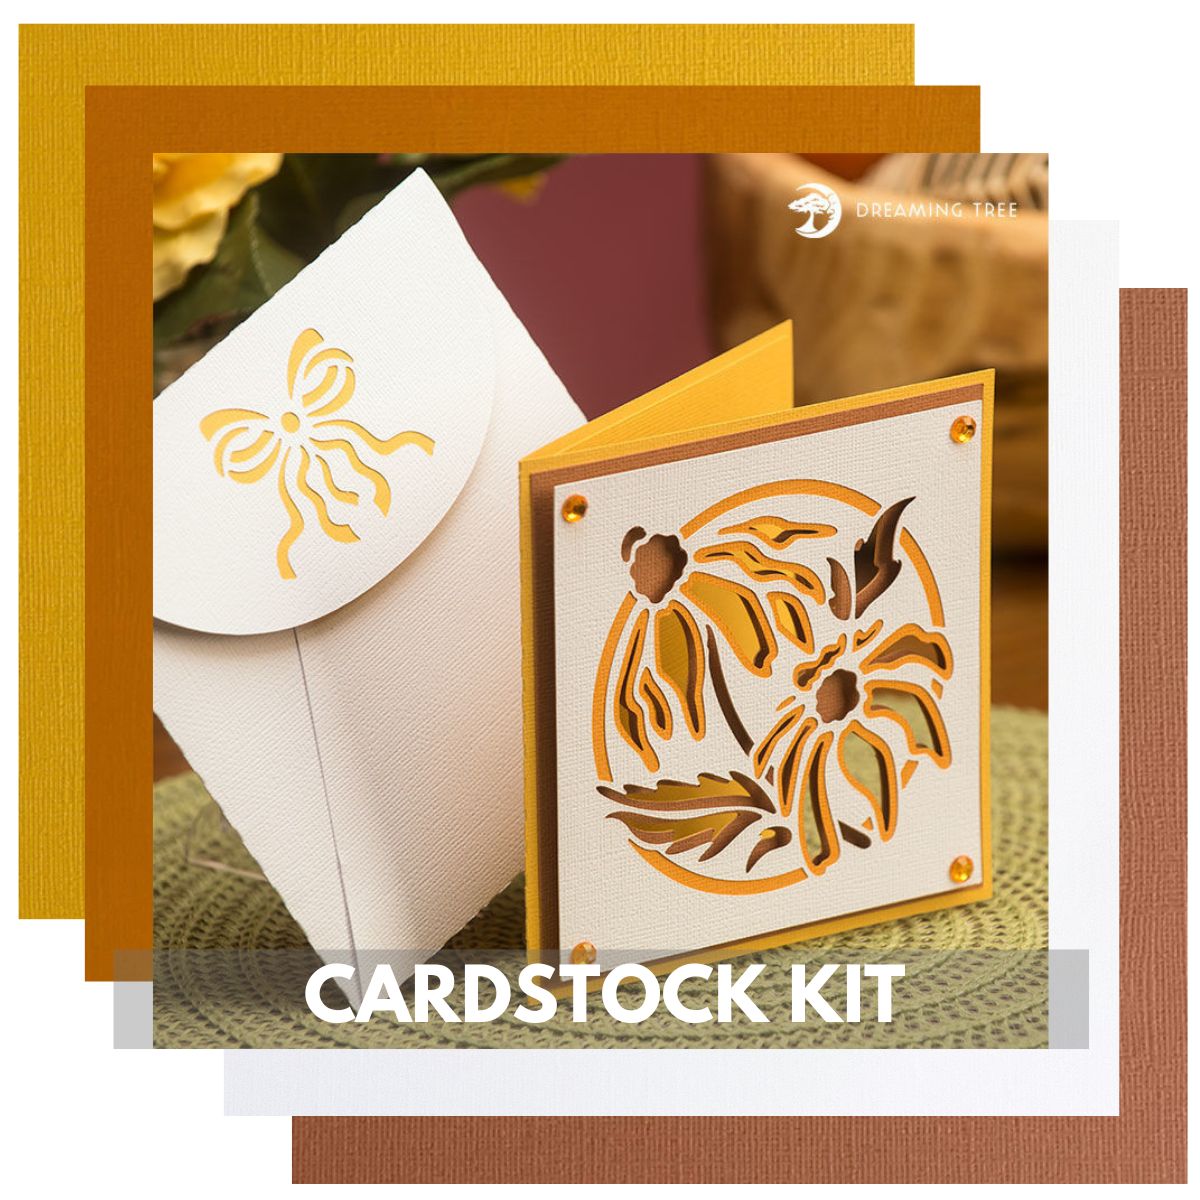 cardstock card kit for dreaming tree yellow floral card